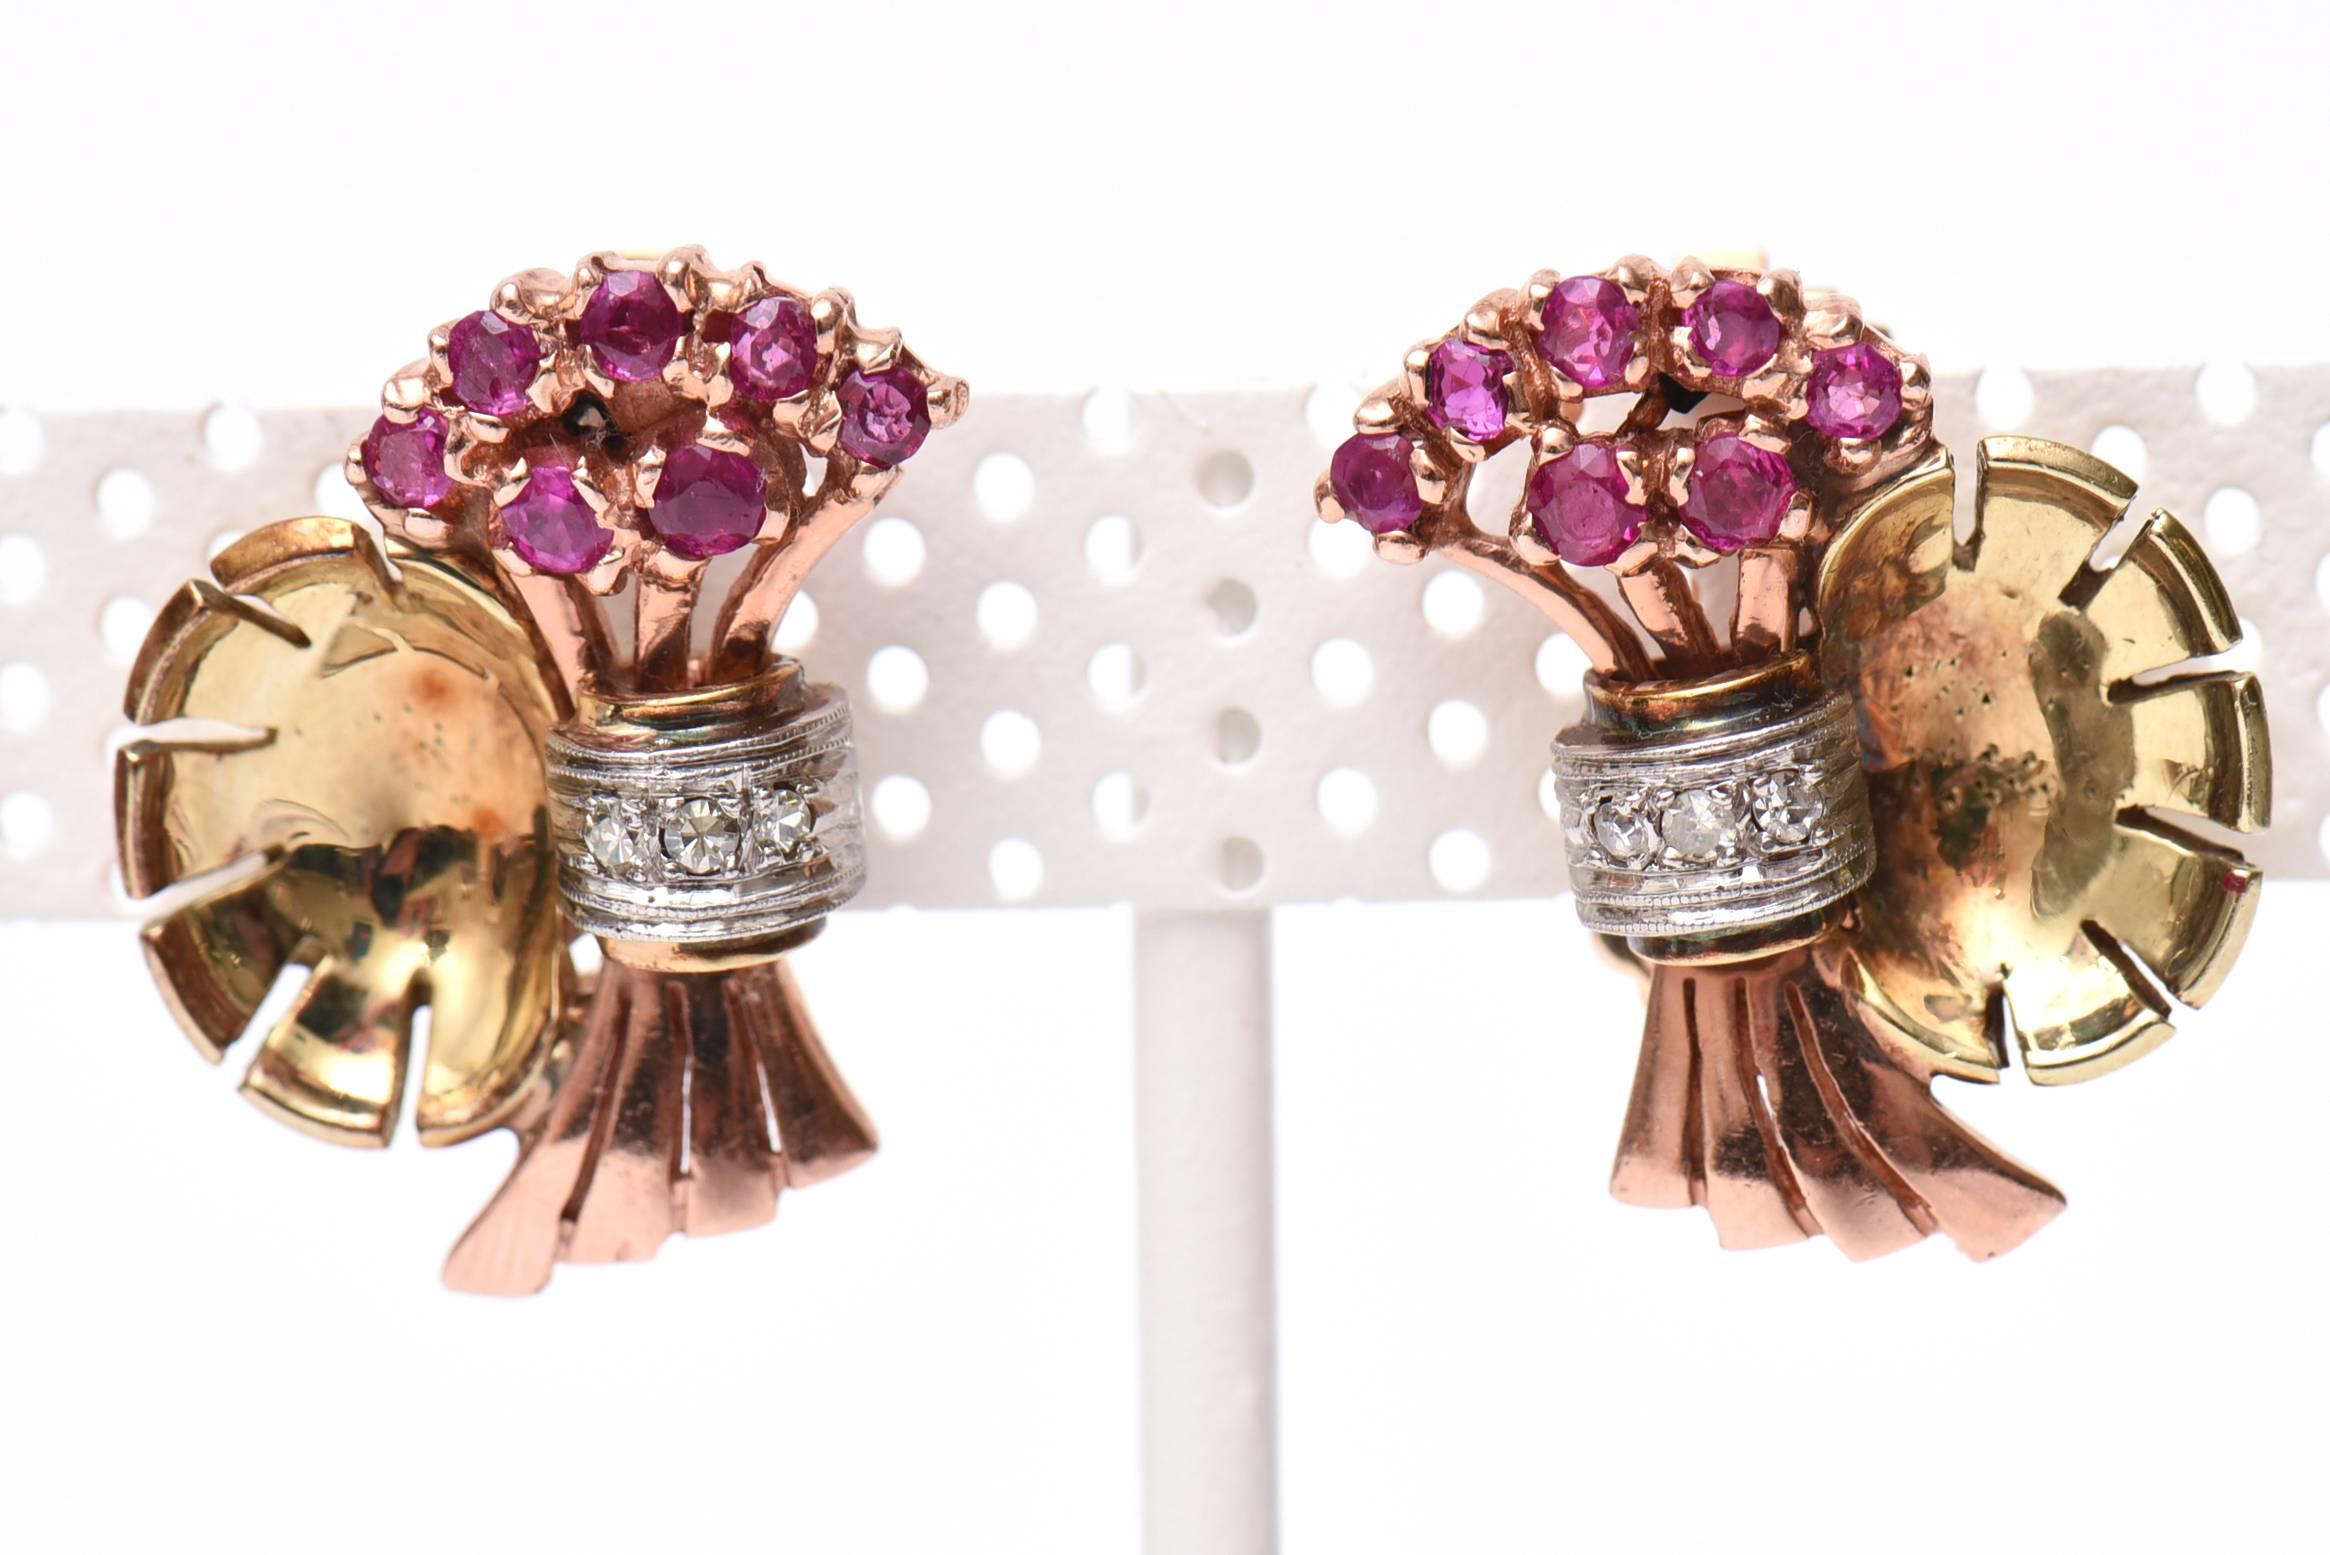 These lovely pair of 1940's clip on earrings have 14 round rubies and 6 single cut round diamonds. They are a combination of rose gold and 14K yellow gold.
The flower like form is beautiful.
They are 11.7DWT